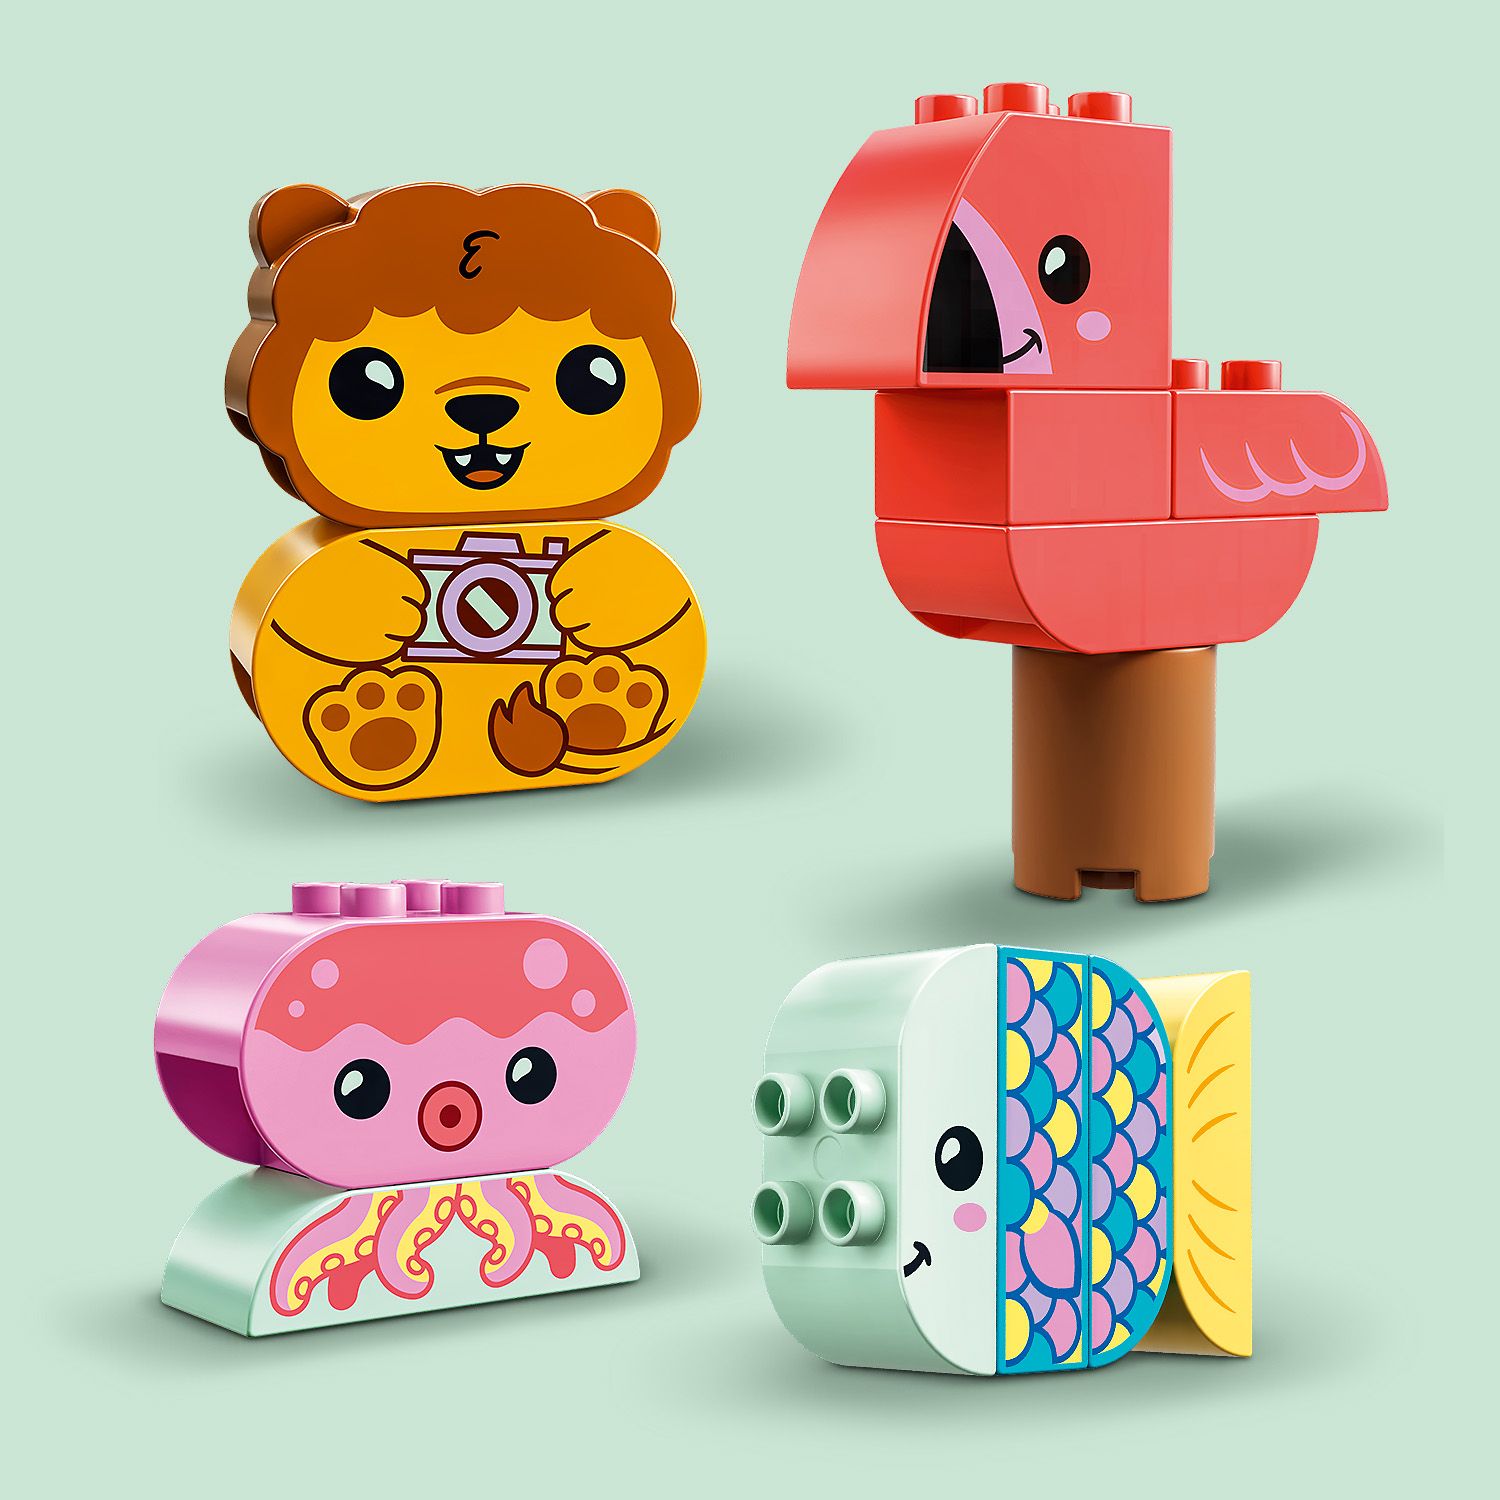 4 cute animals to build